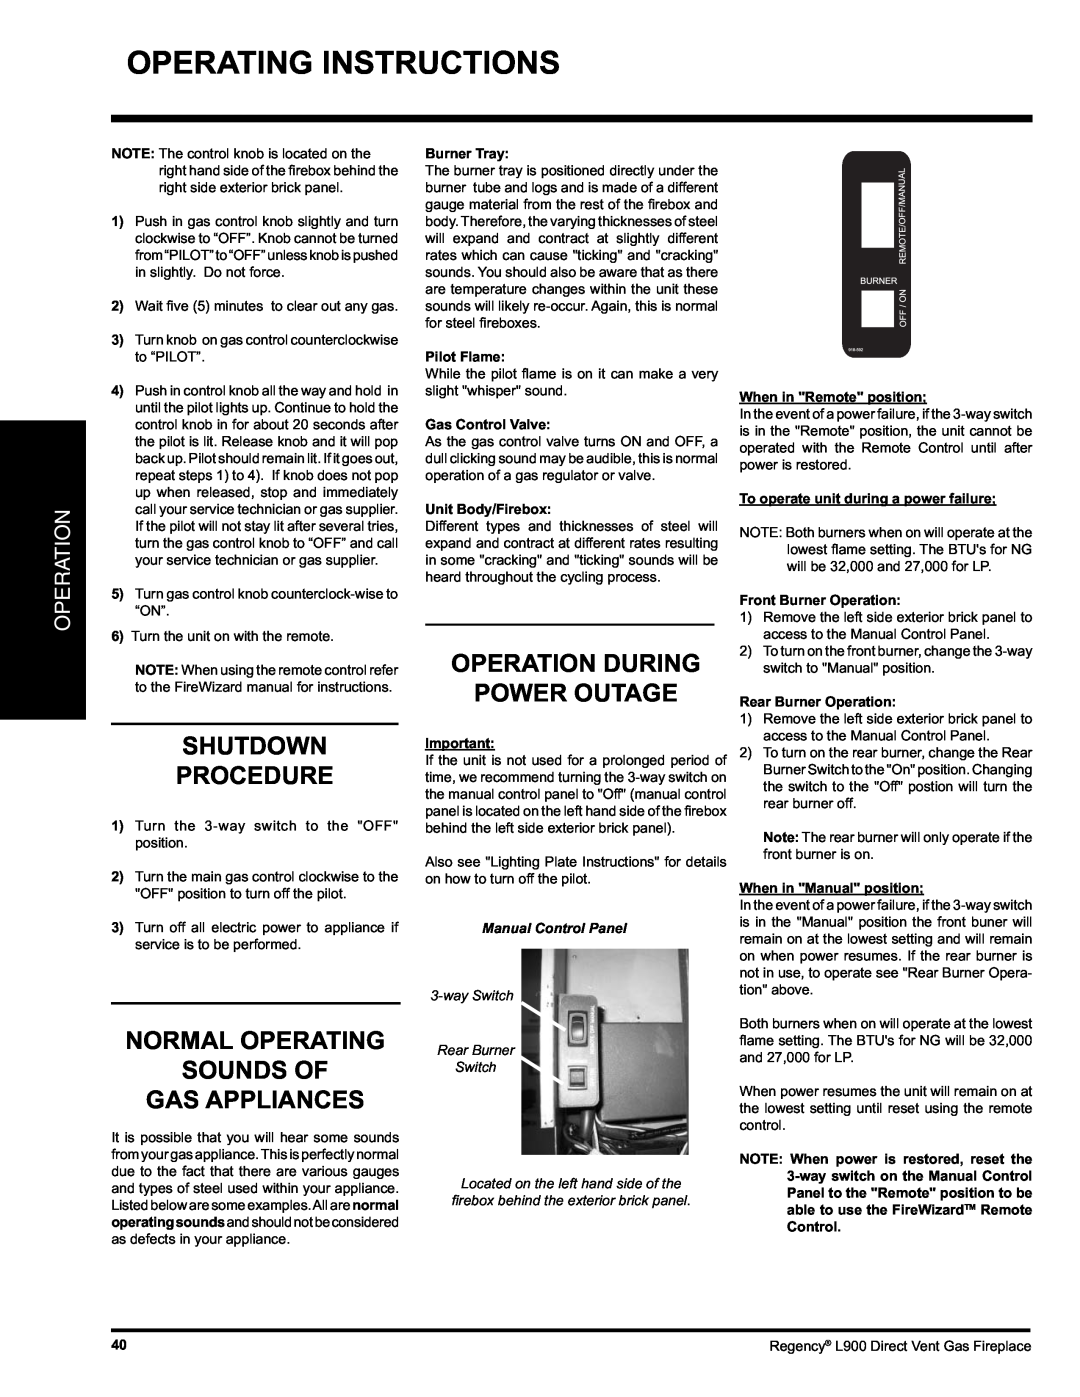 Regency L900-LP, L900-NG Operating Instructions, Shutdown Procedure, Normal Operating Sounds Of Gas Appliances, Operation 